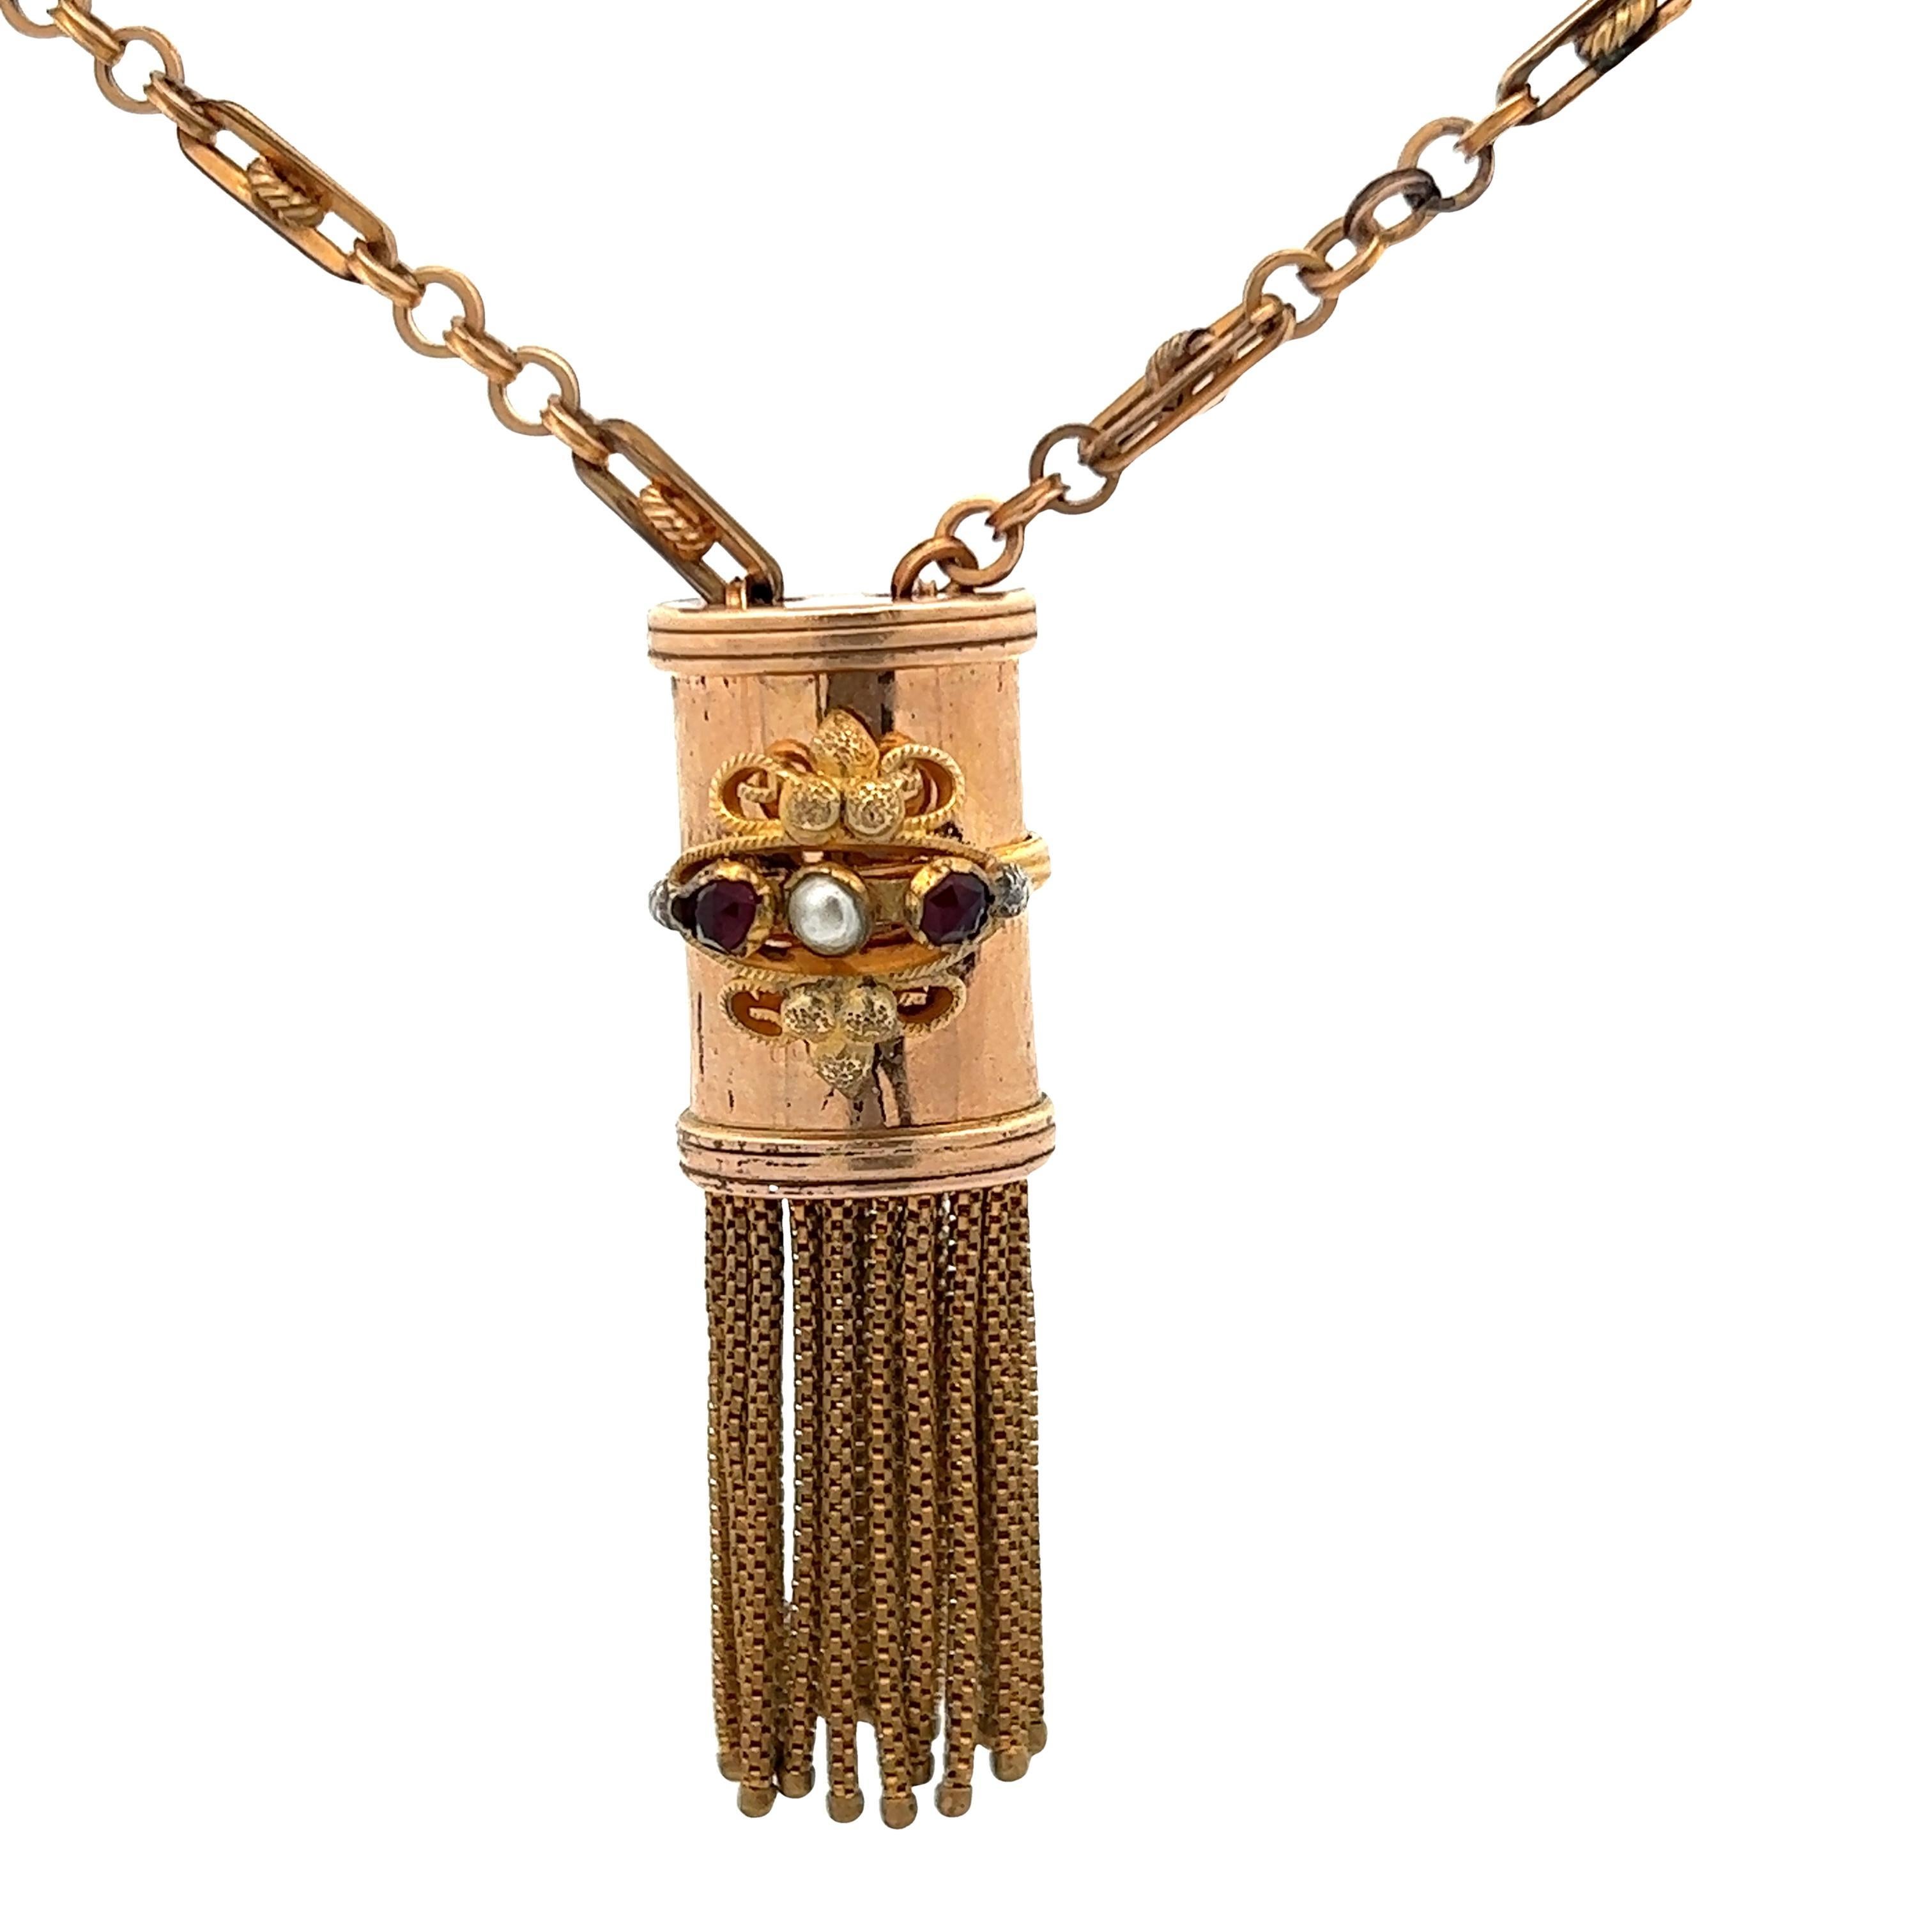 This gorgeous gold filled tassel necklace from the 1890s Victorian era is very special. The circle and bar chain is very unique in todays world as it is less common for todays time period, unlike 1890 Victorian. The pendant features two rose cut